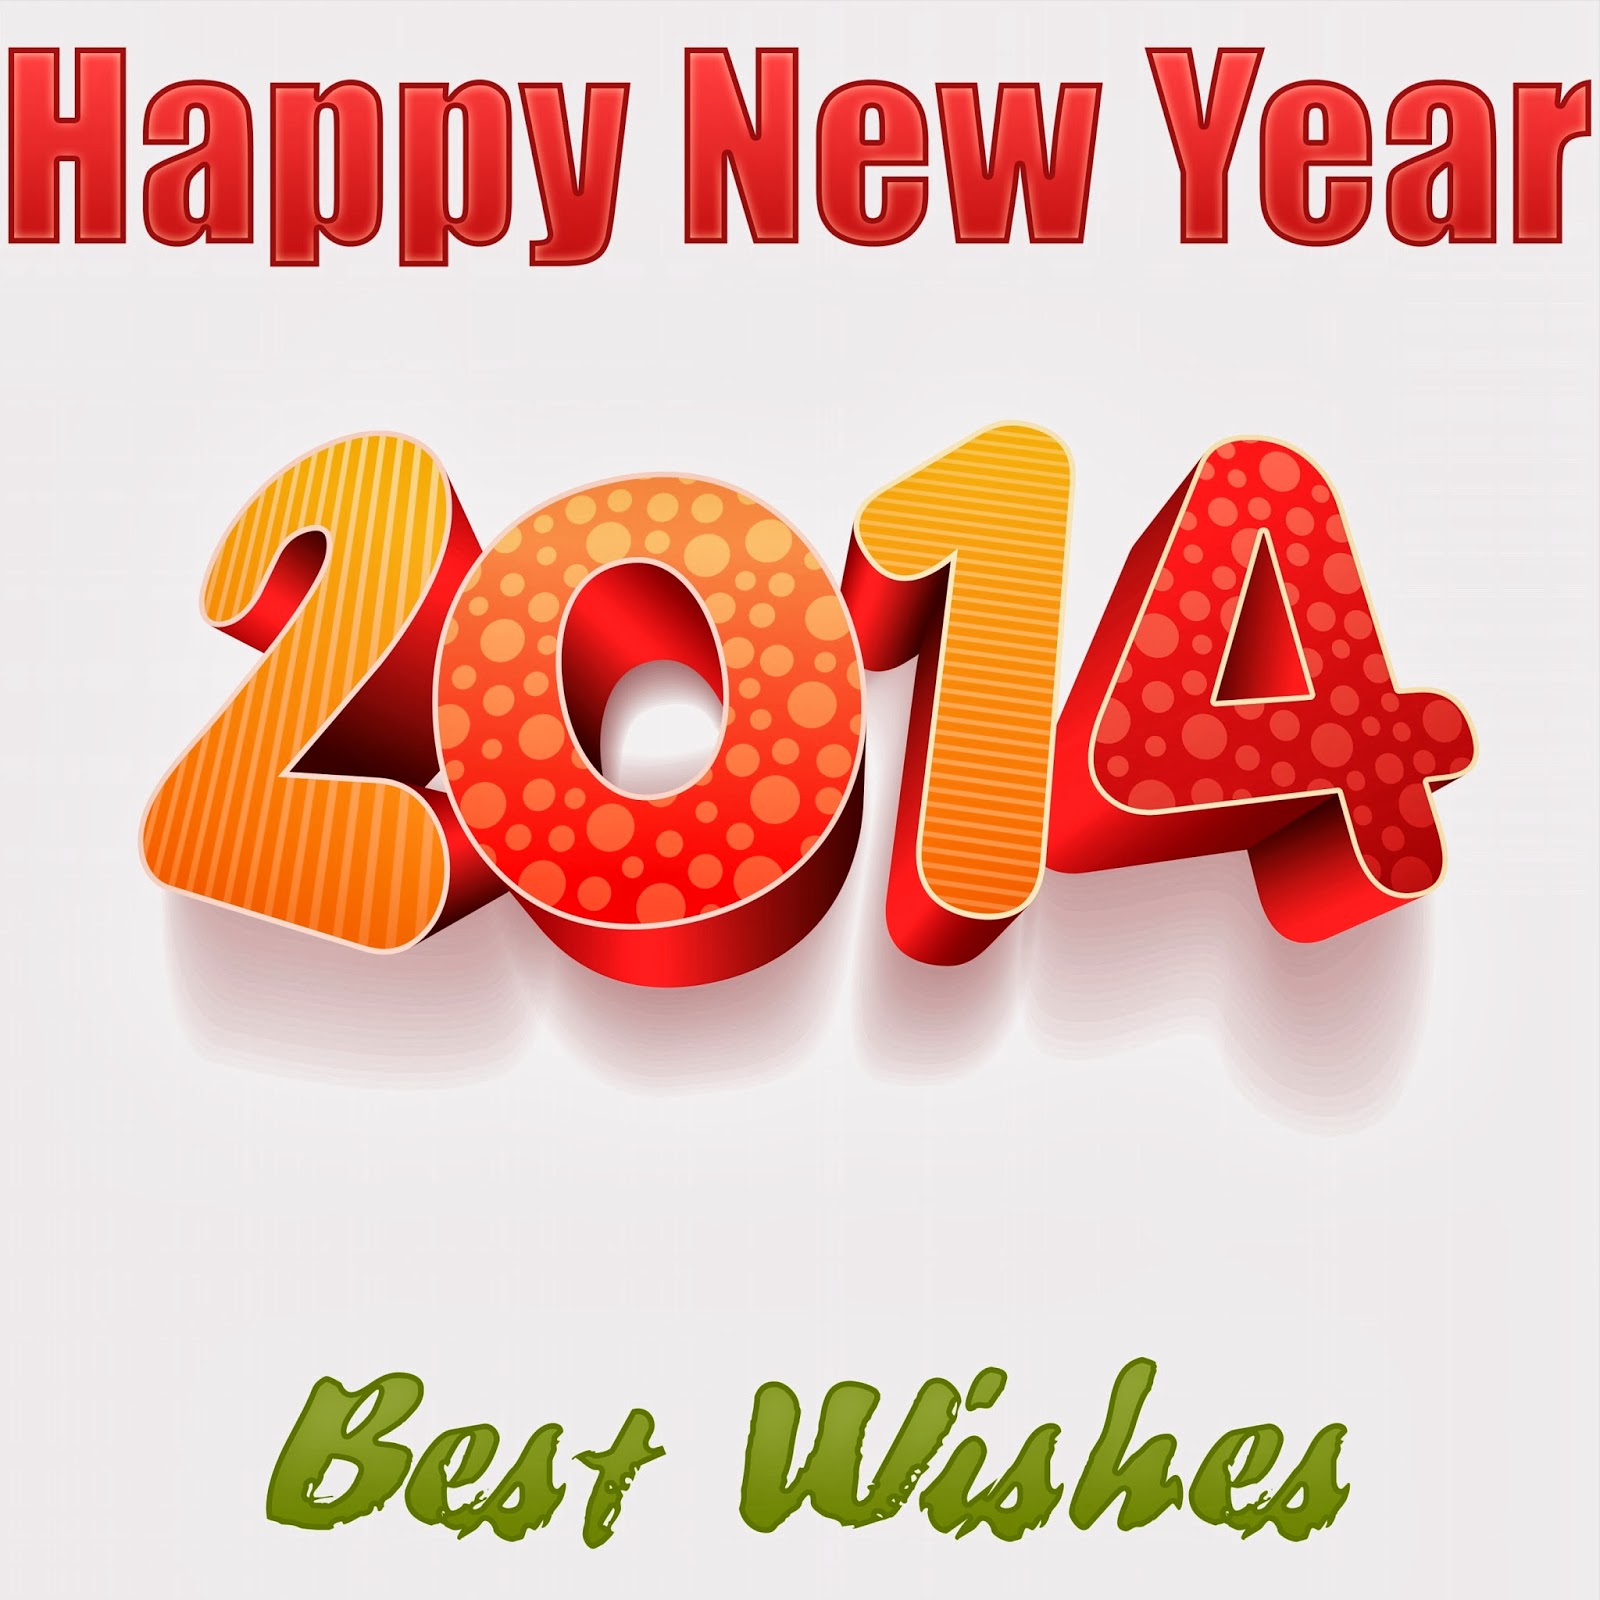 ... FB, New year wallpaper, Happy New Year 2014 3D wallpapers, Happy New